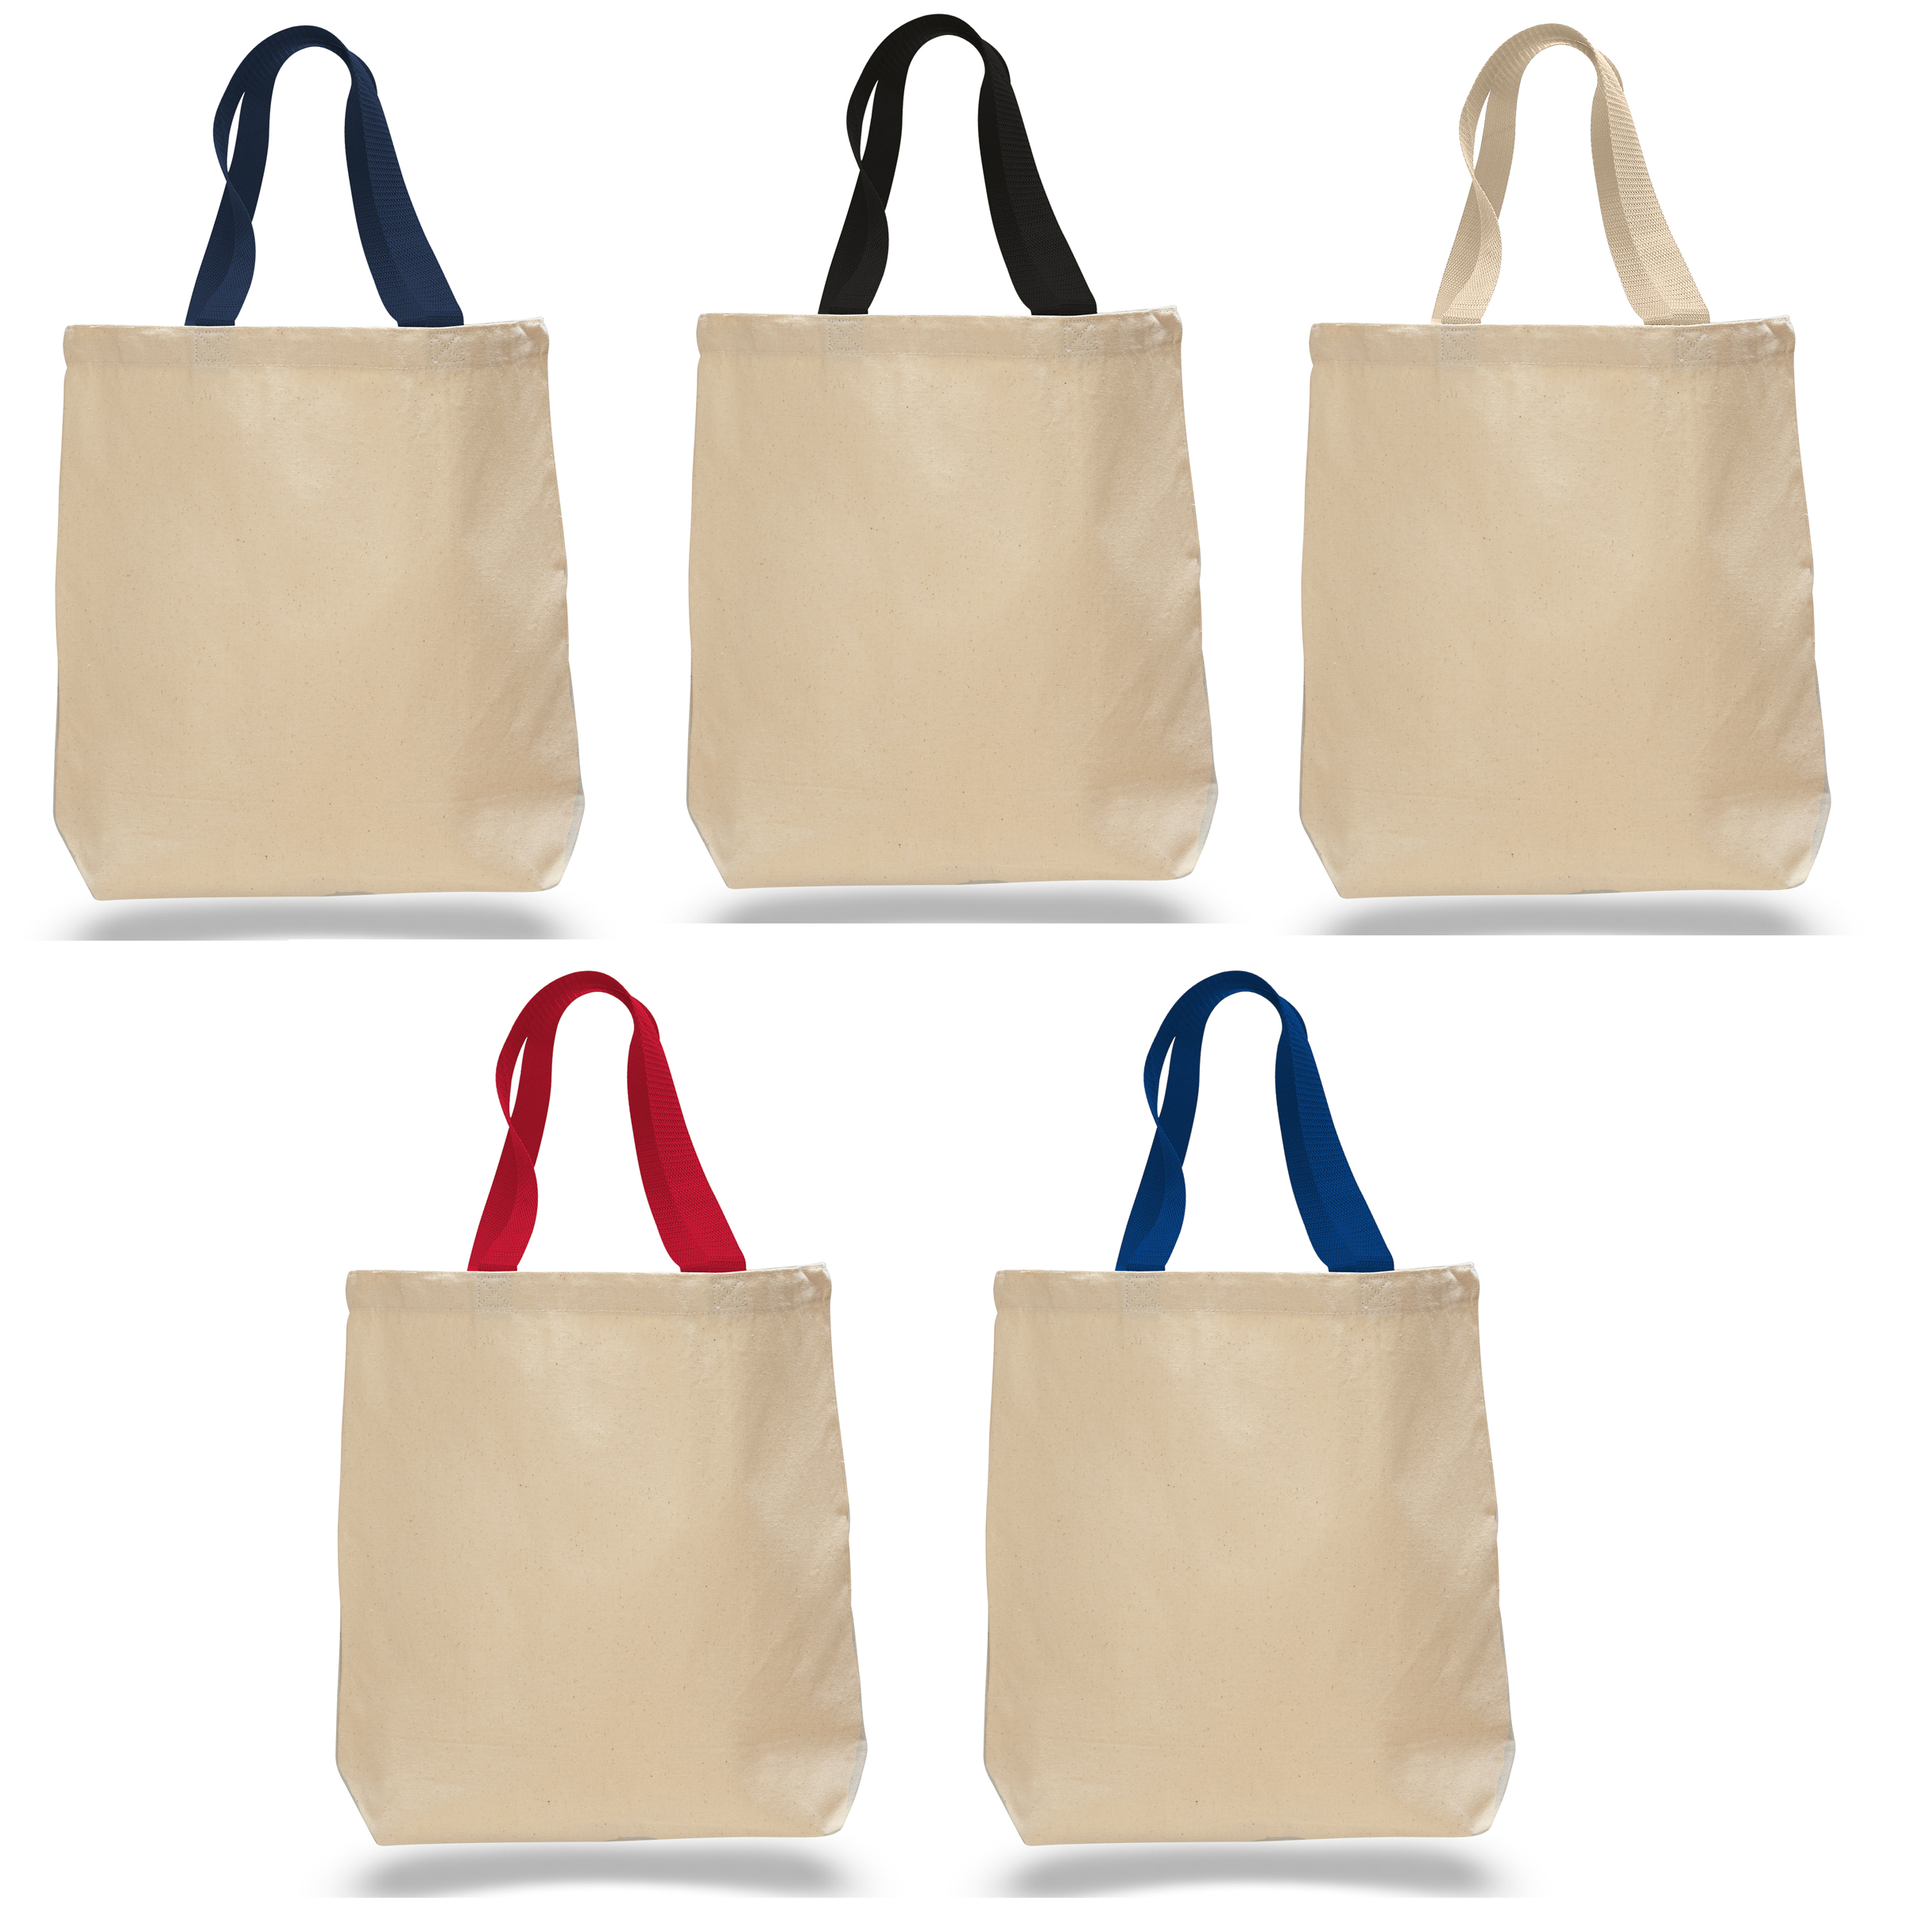 ''19'''' Canvas Tote Bags w/ Contrasting Handles''